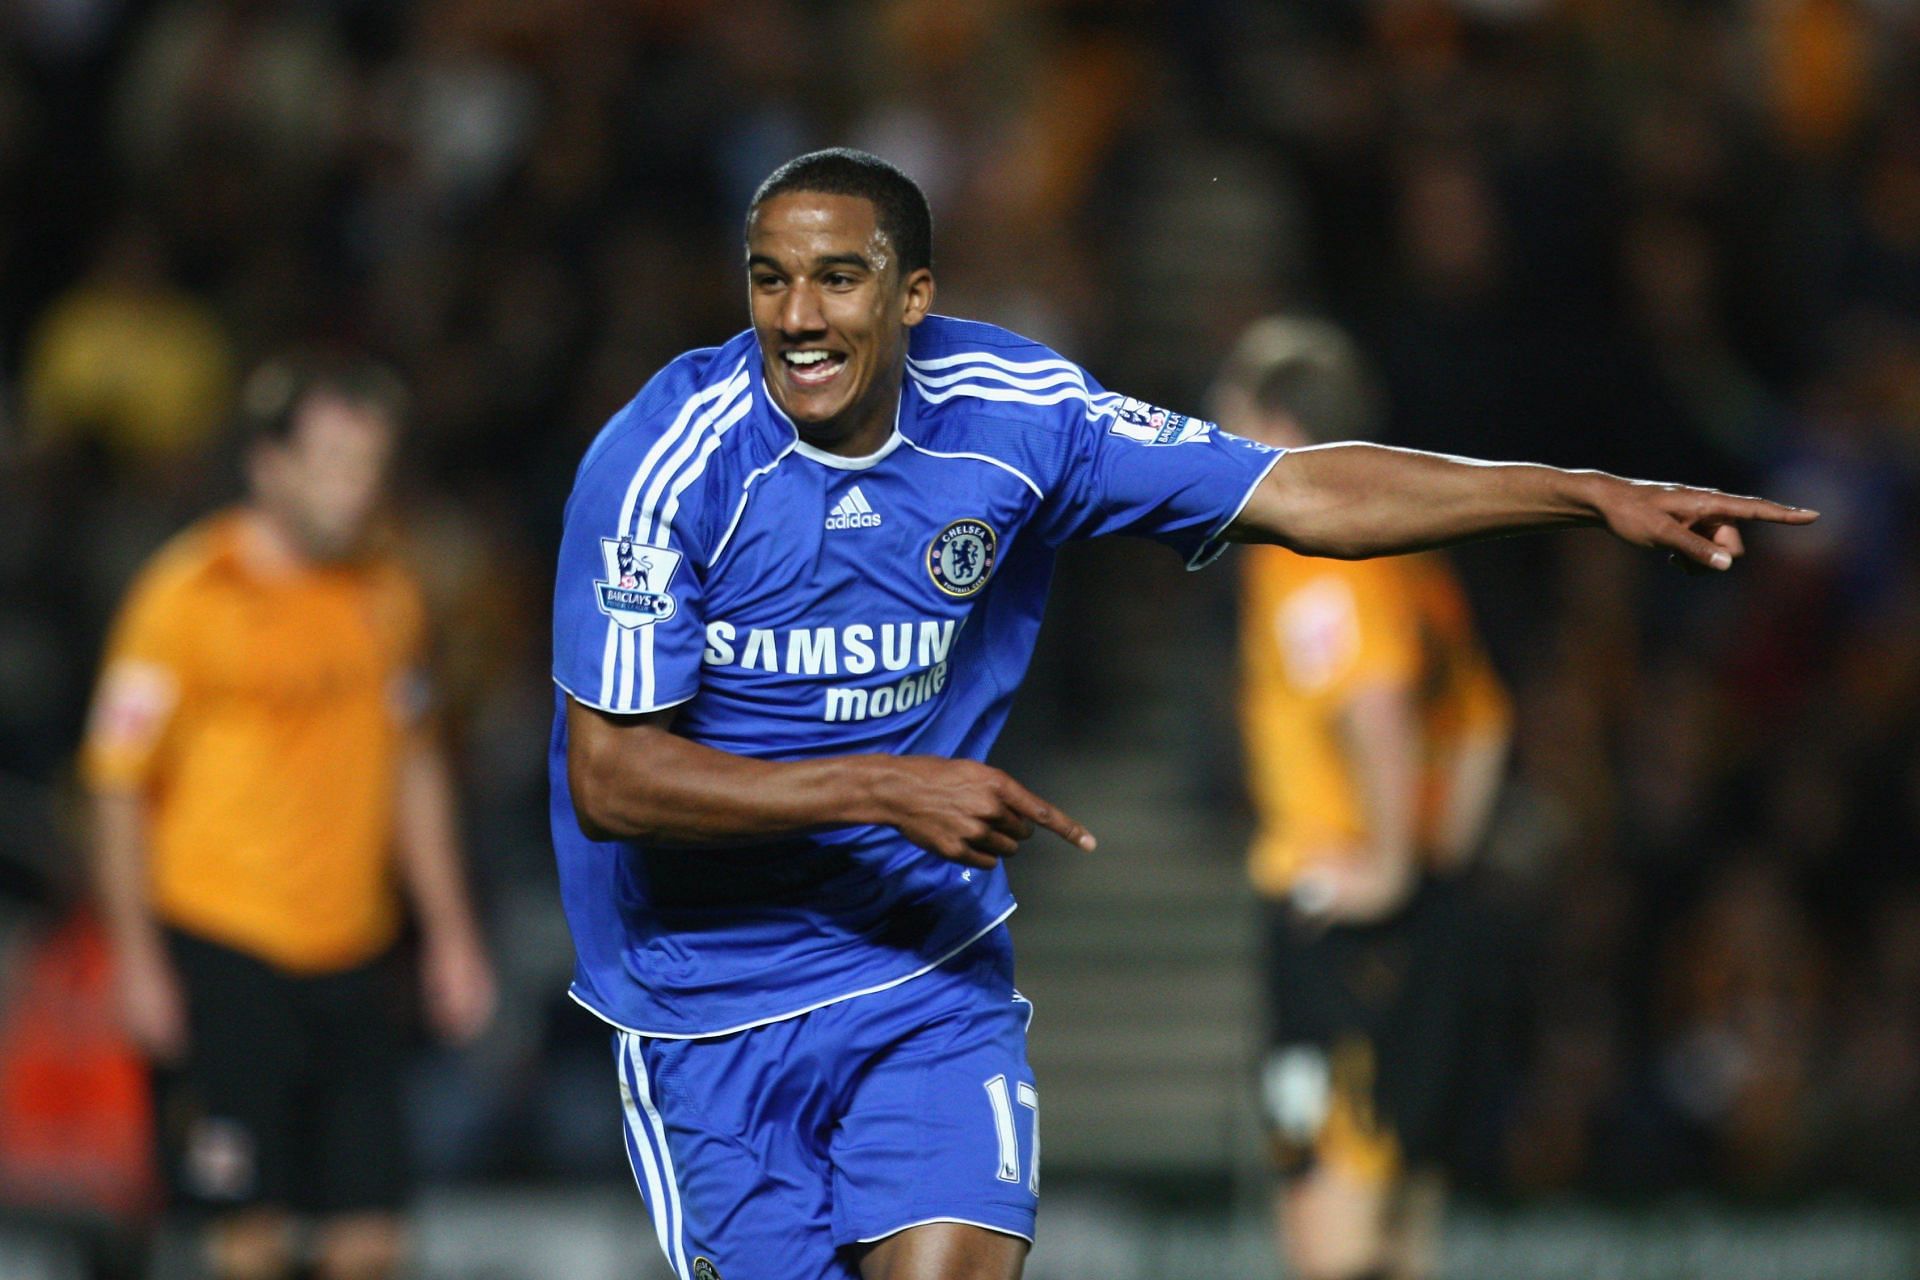 Scott Sinclair was only 16 when he joined Chelsea